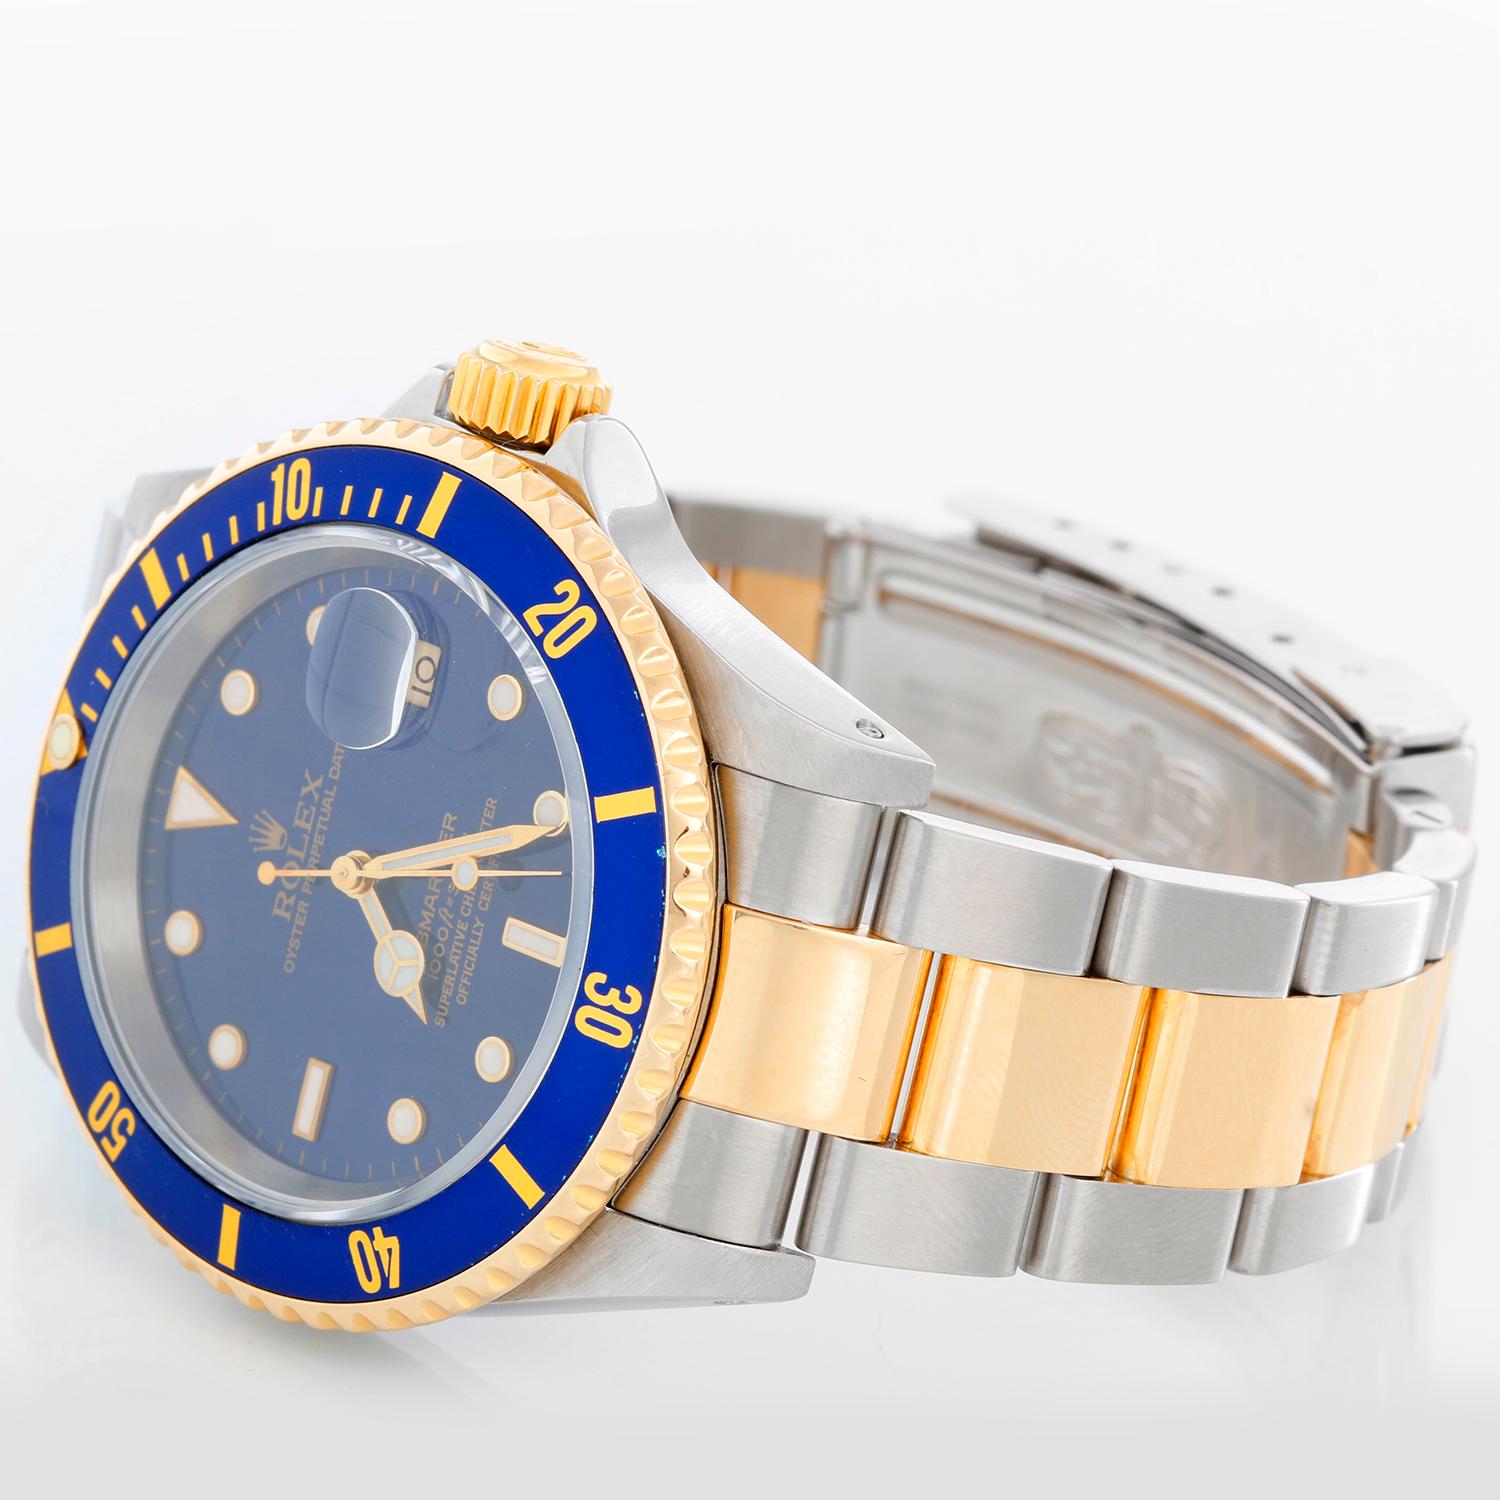 Rolex Submariner 2-Tone Steel & Gold Men's Watch 16613 - Automatic winding. Stainless steel case with gold rotating bezel with blue insert. Blue dial. Rolex oyster bracelet. Pre-owned with Rolex box and papers